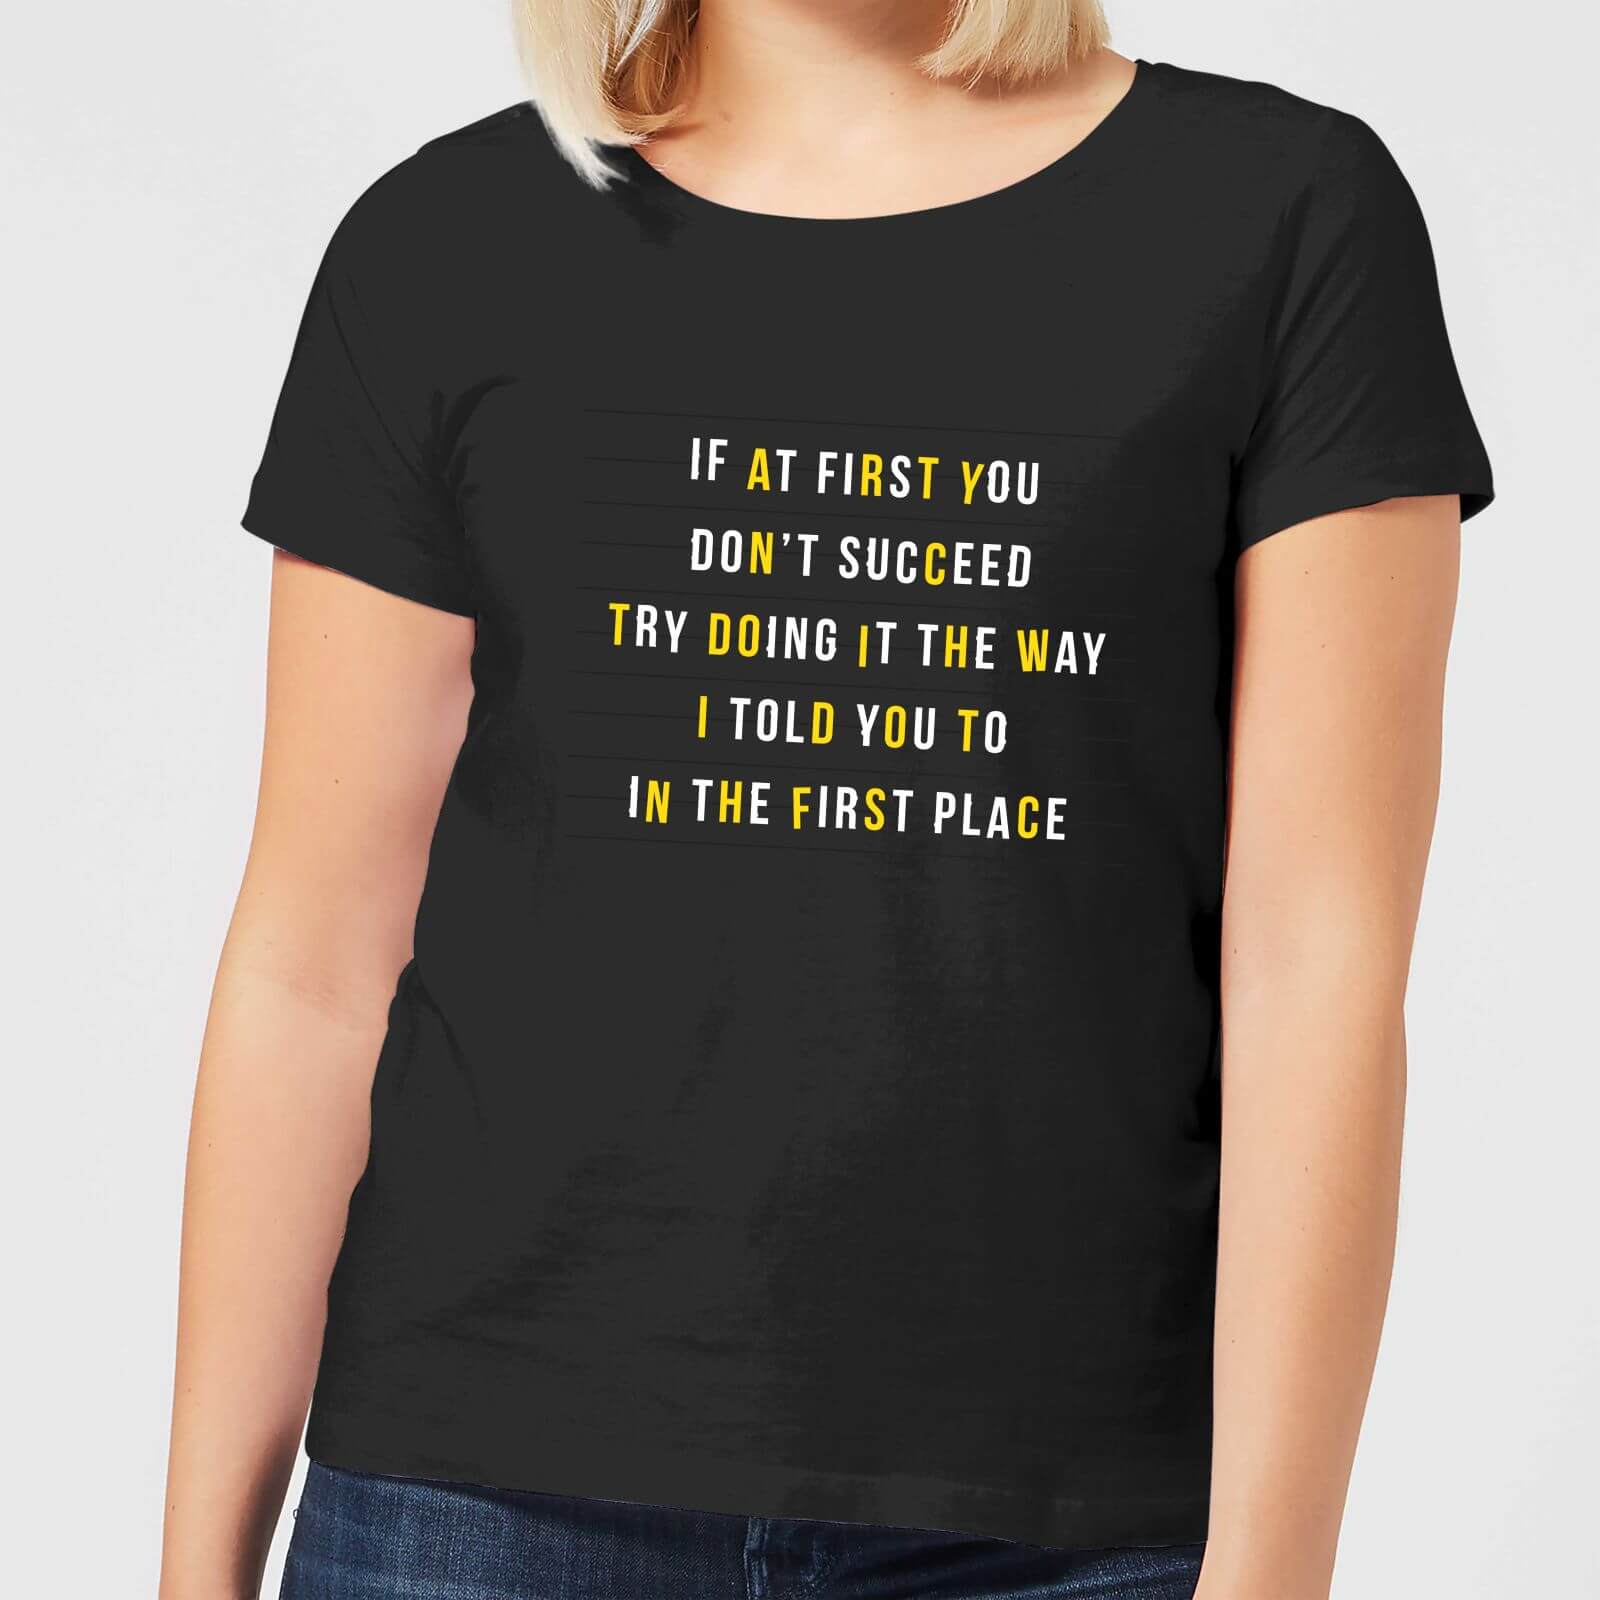 If At First You Don't Succeed Women's T-Shirt - Black - Xl